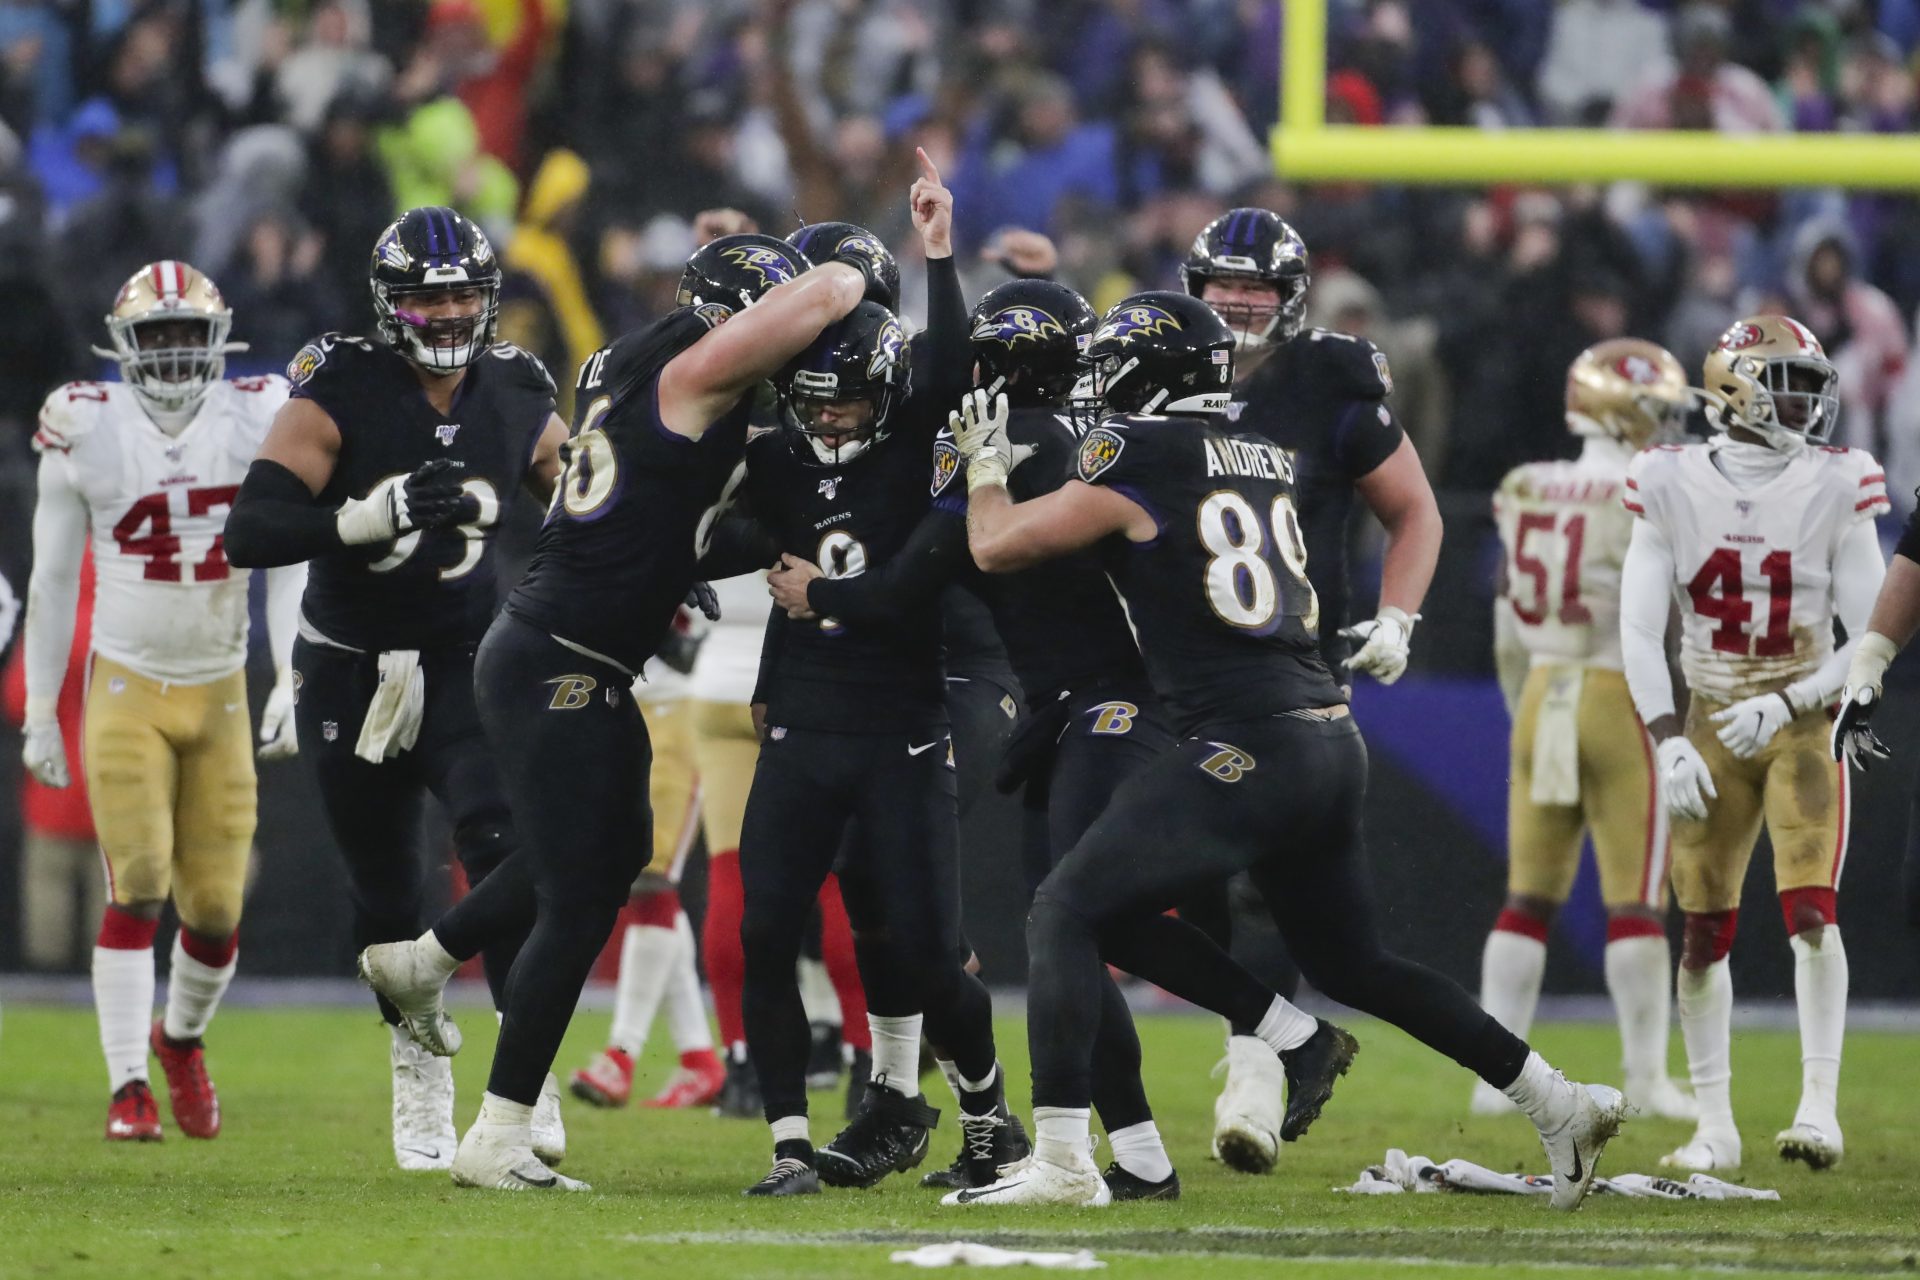 Baltimore Ravens kicker Justin Tucker (9) is surrounded by teammates after kicking the winning field goal against the San Francisco 49ers in the second half of an NFL football game, Sunday, Dec. 1, 2019, in Baltimore, Md. Ravens won 20-17.